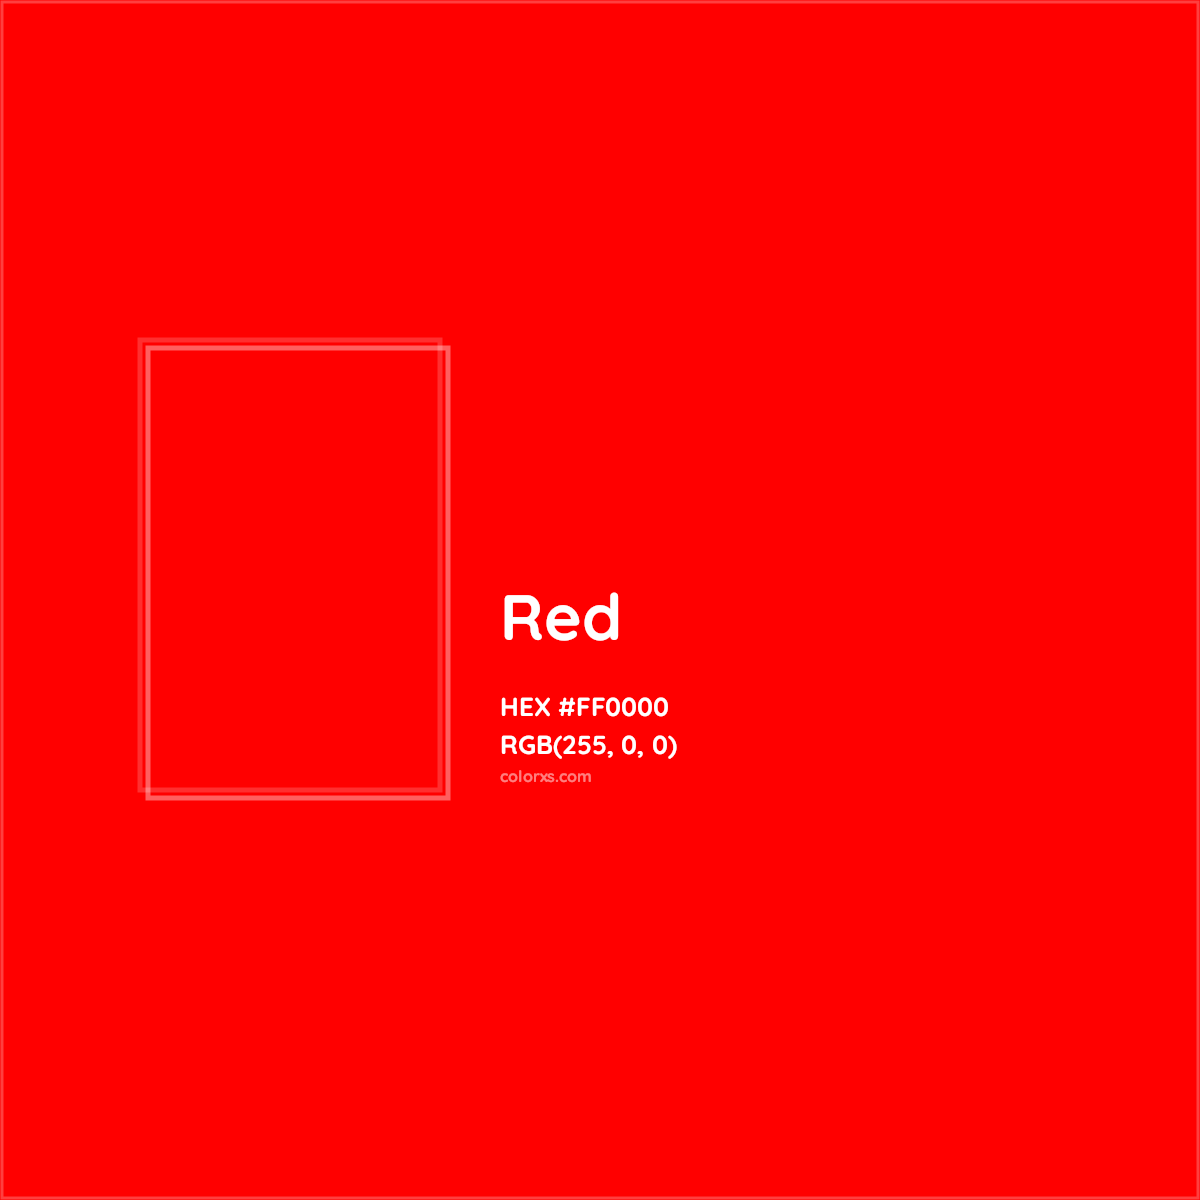 HEX #FF0000 Red Color - Color Code